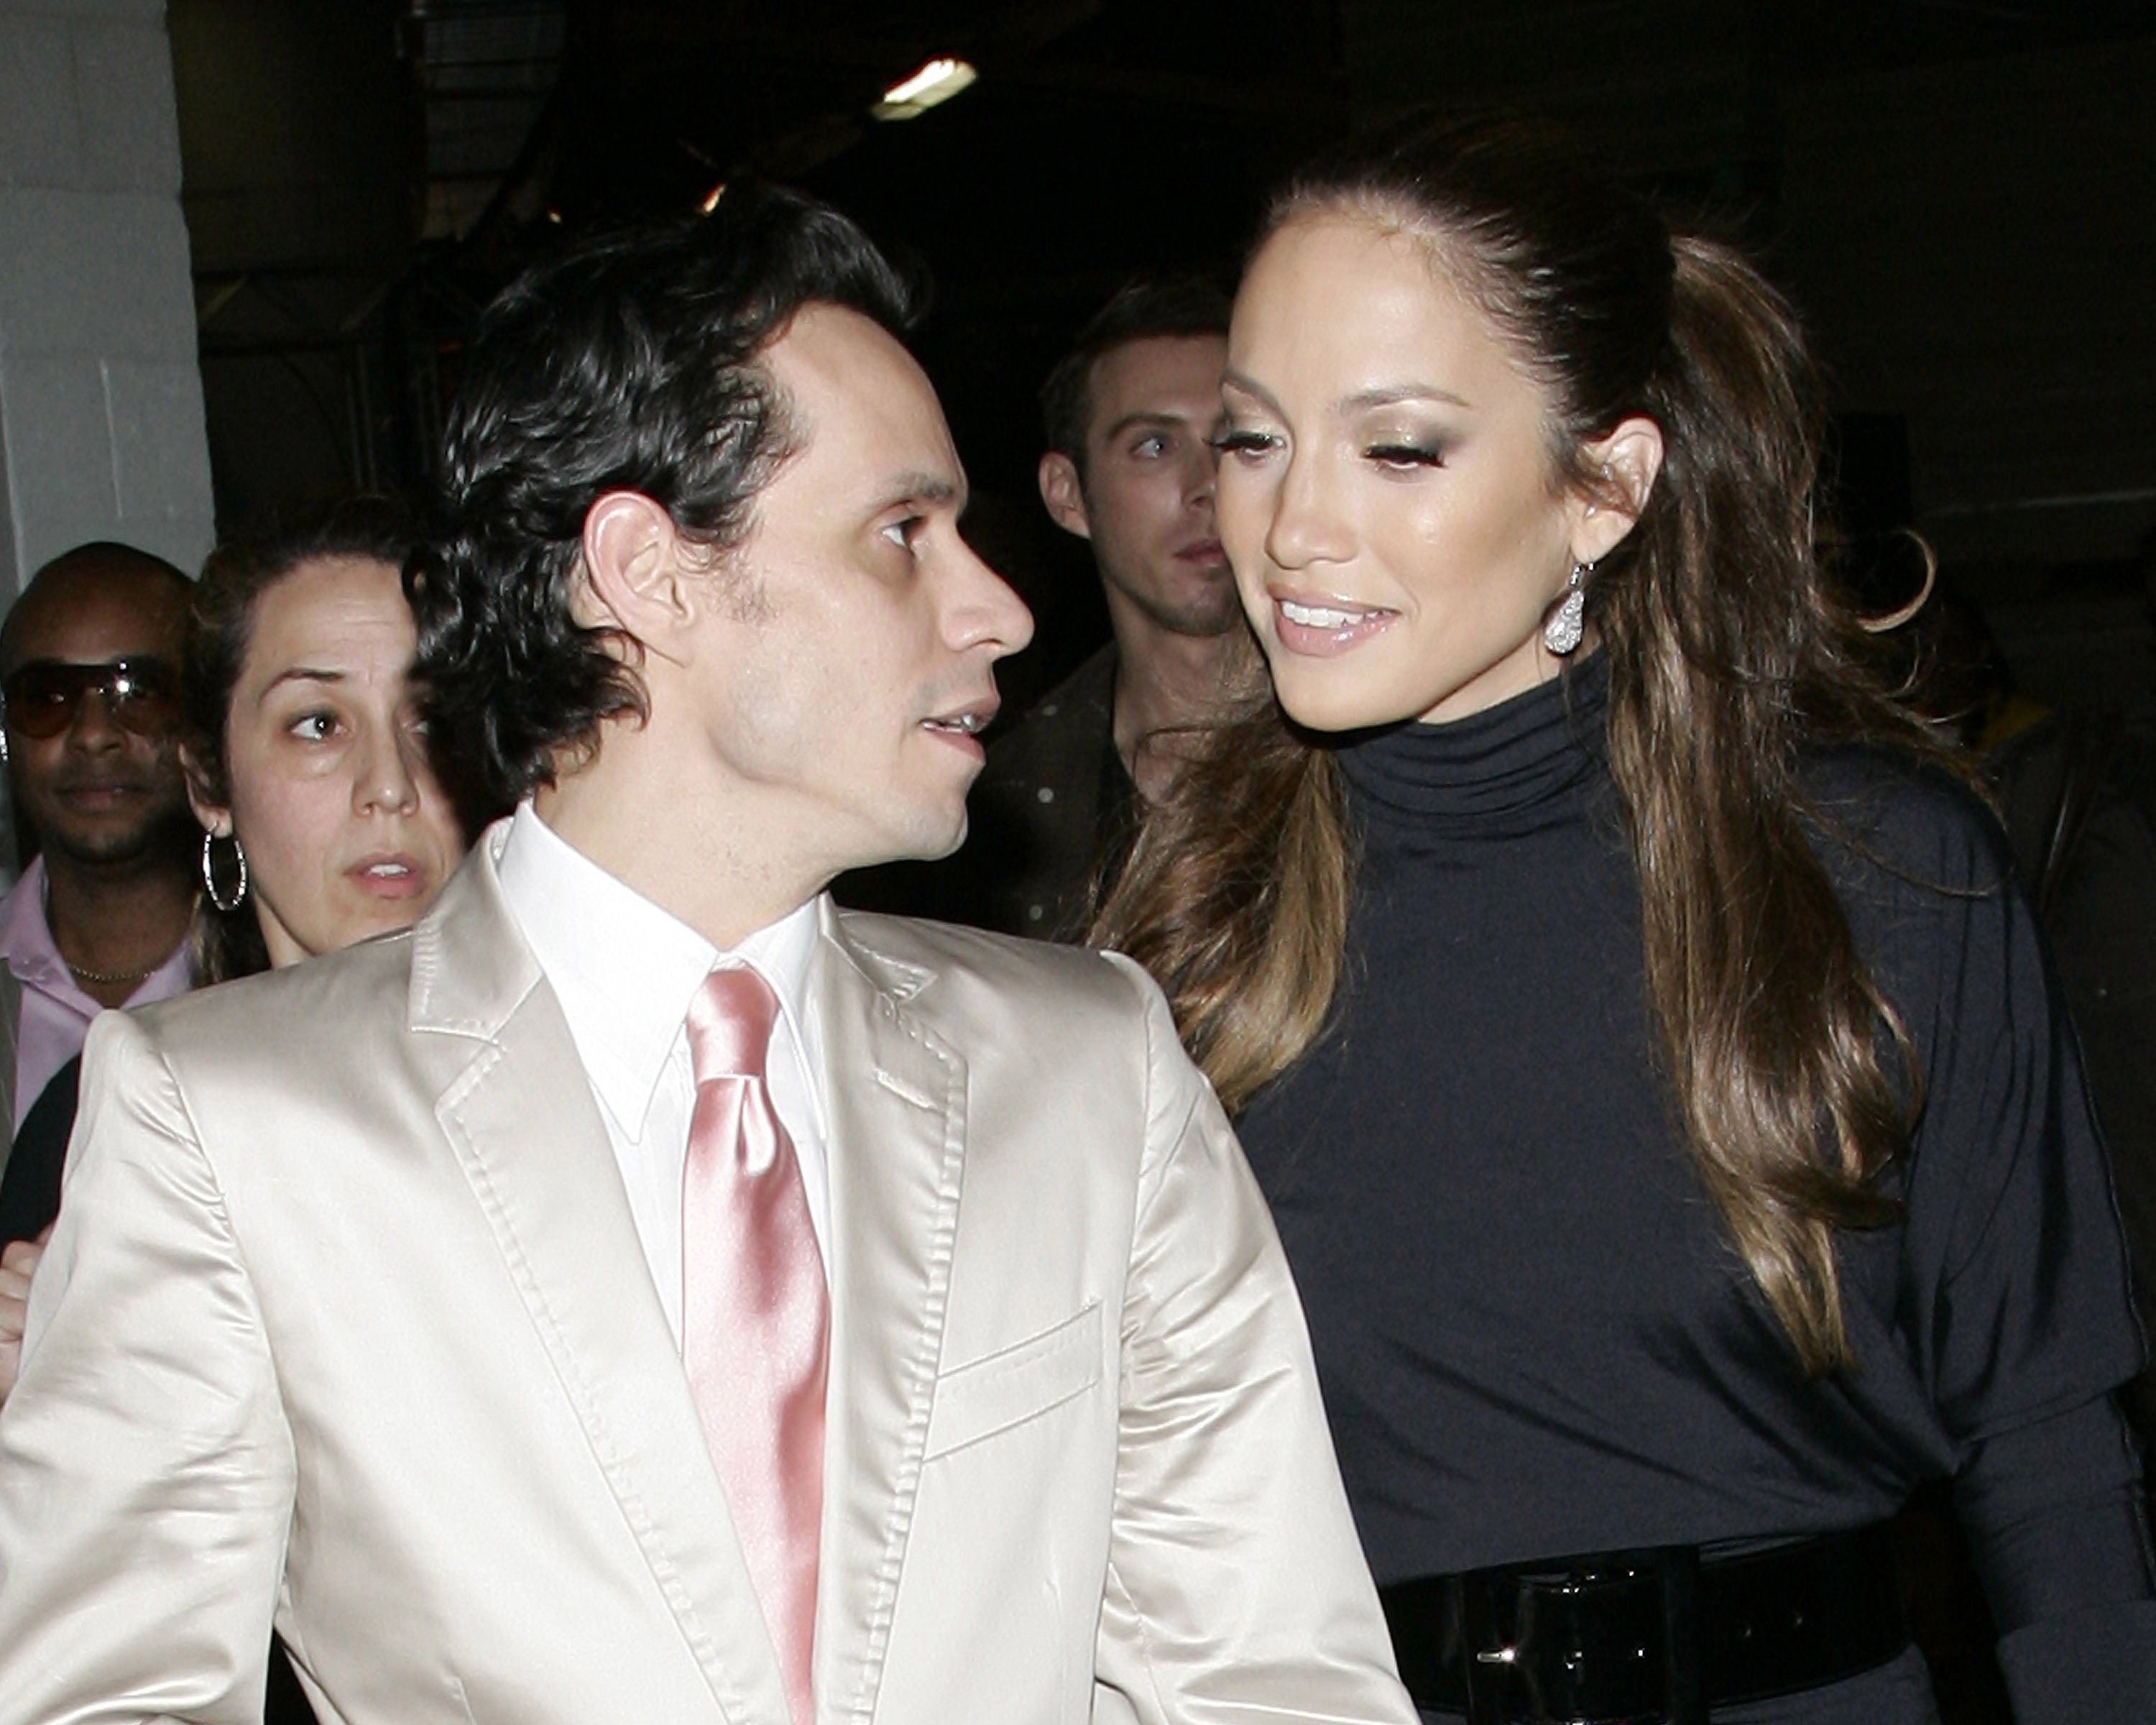 Marc Anthony speaking to Jennifer Lopez while attending a red carpet event.